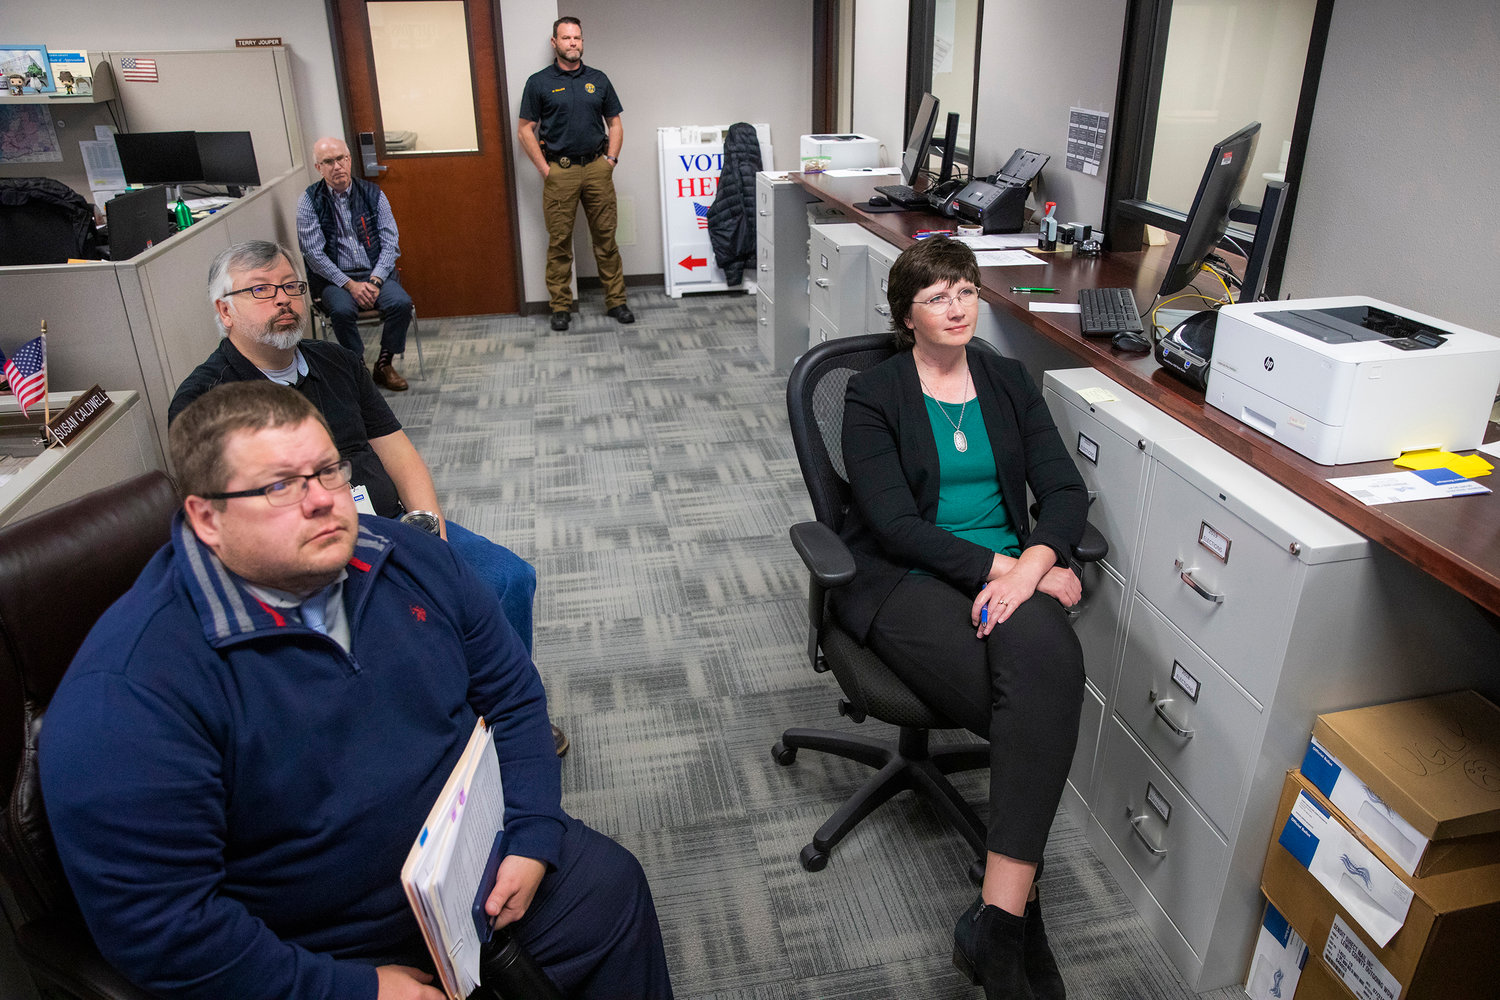 A member of the Lewis County Sheriff’s Office stands guard as Prosecutor Jonathan Meyer, Chief Deputy Auditor Tom Stanton, Auditor Larry Grove, and Commissioner Lindsey Pollock attend a Canvasing Board meeting Wednesday morning at the Lewis County Courthouse.